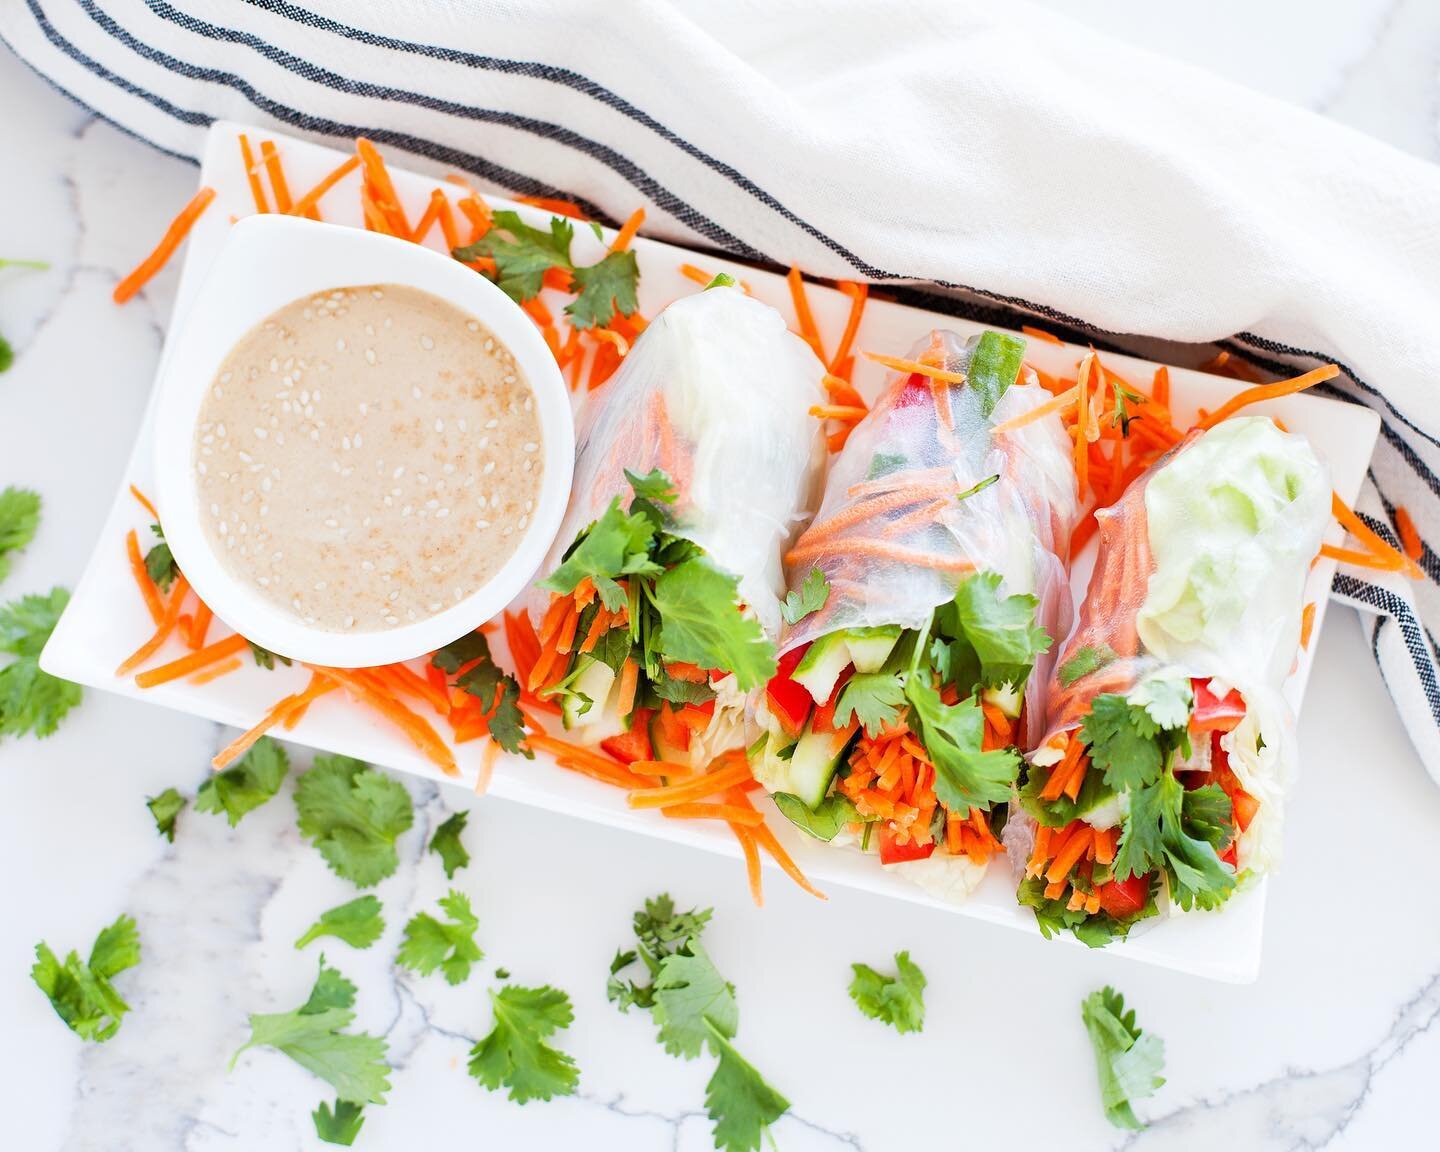 Too hot to cook? I hear ya! Enter our AMAZING Spiralized Vegetable Spring Rolls, the perfect veggie loaded meal that will leave you feeling light, satisfied, and cool! These spring rolls are fun to make so get the whole family involved. 

Simply prep